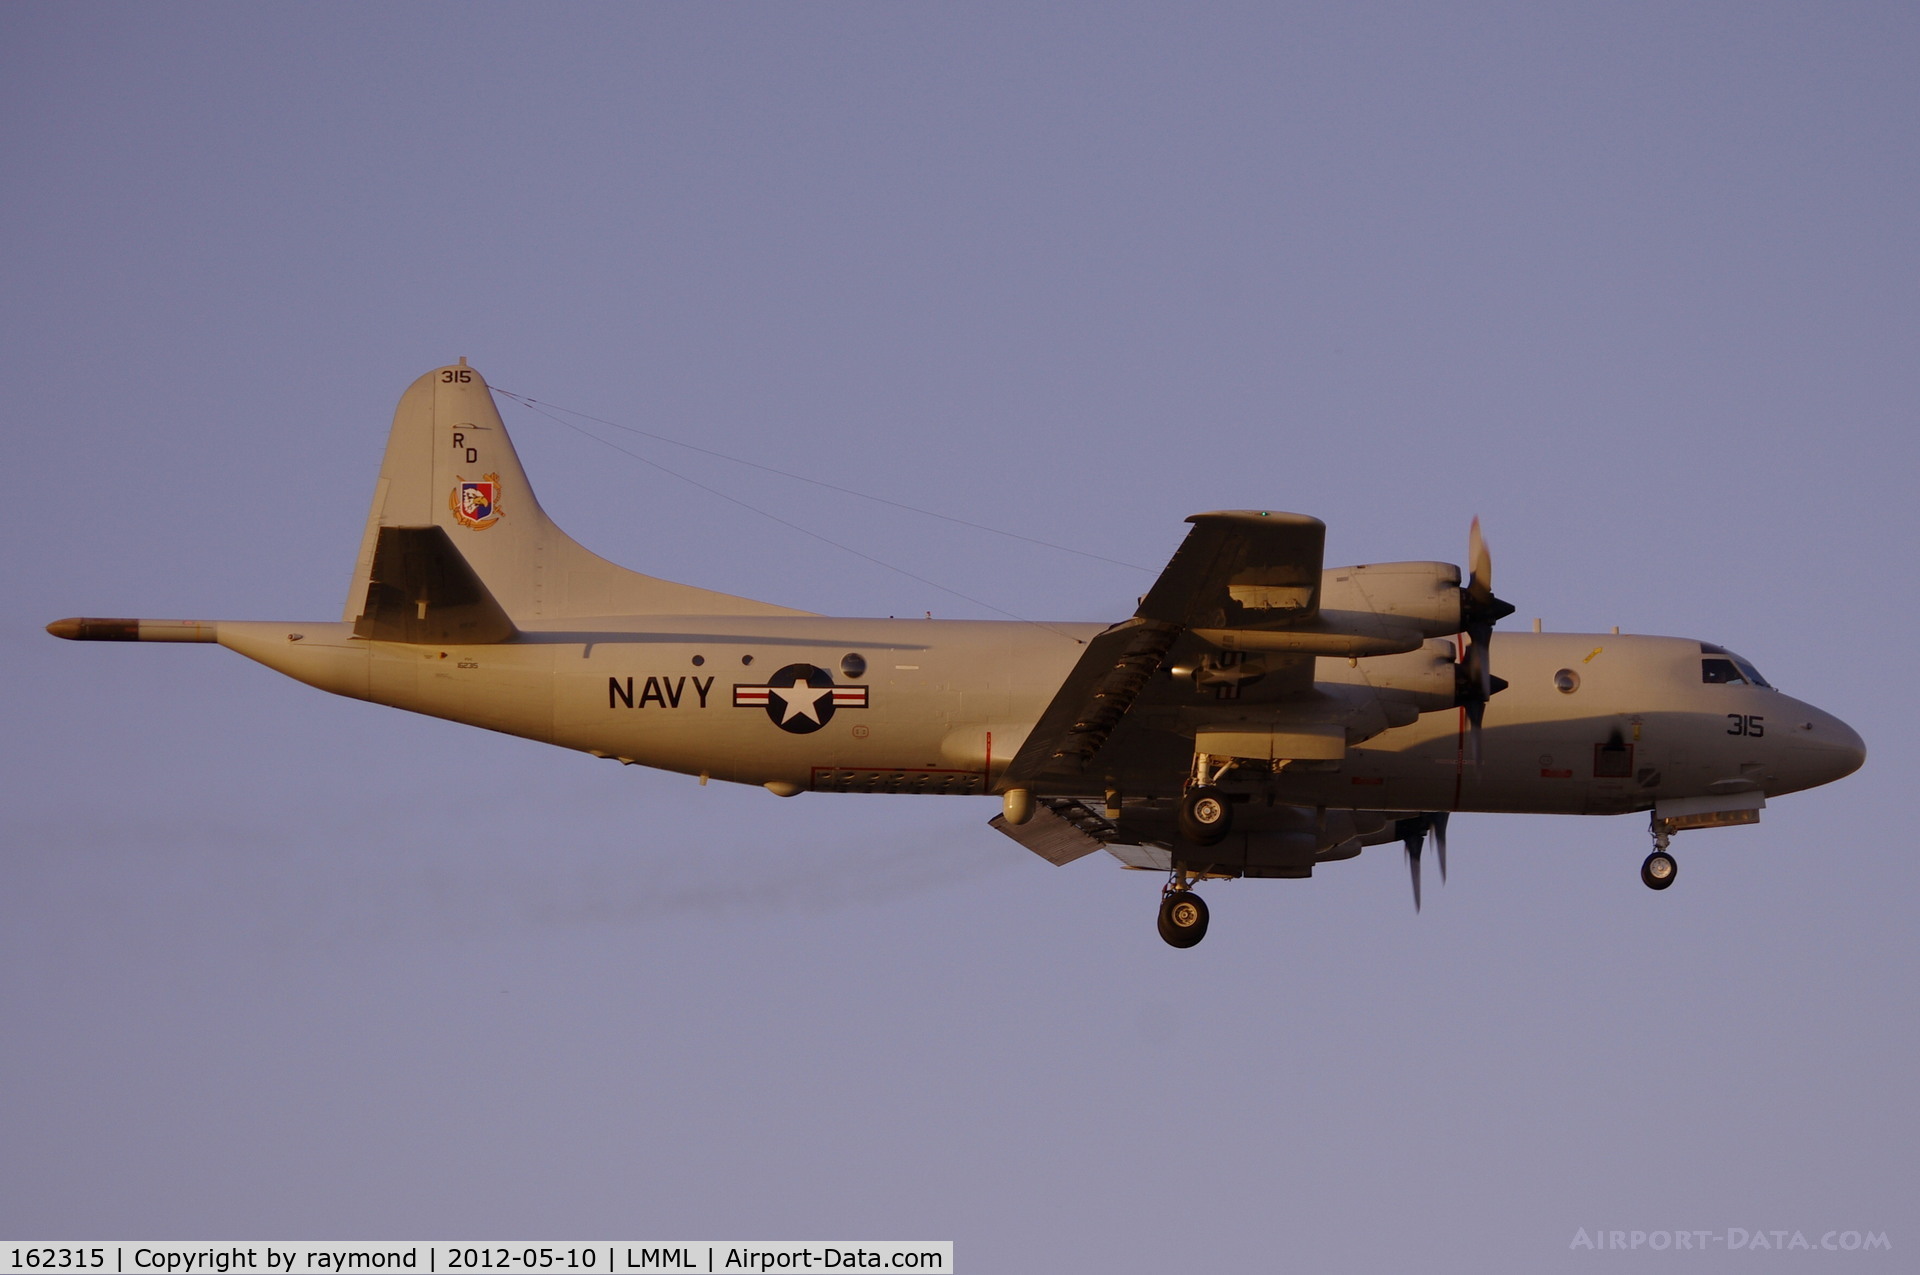 162315, Lockheed P-3C Orion C/N 285G-5788, P3 Orion 162315/RD-315 US Navy during a touch and go on RW13, Luqa, Malta.